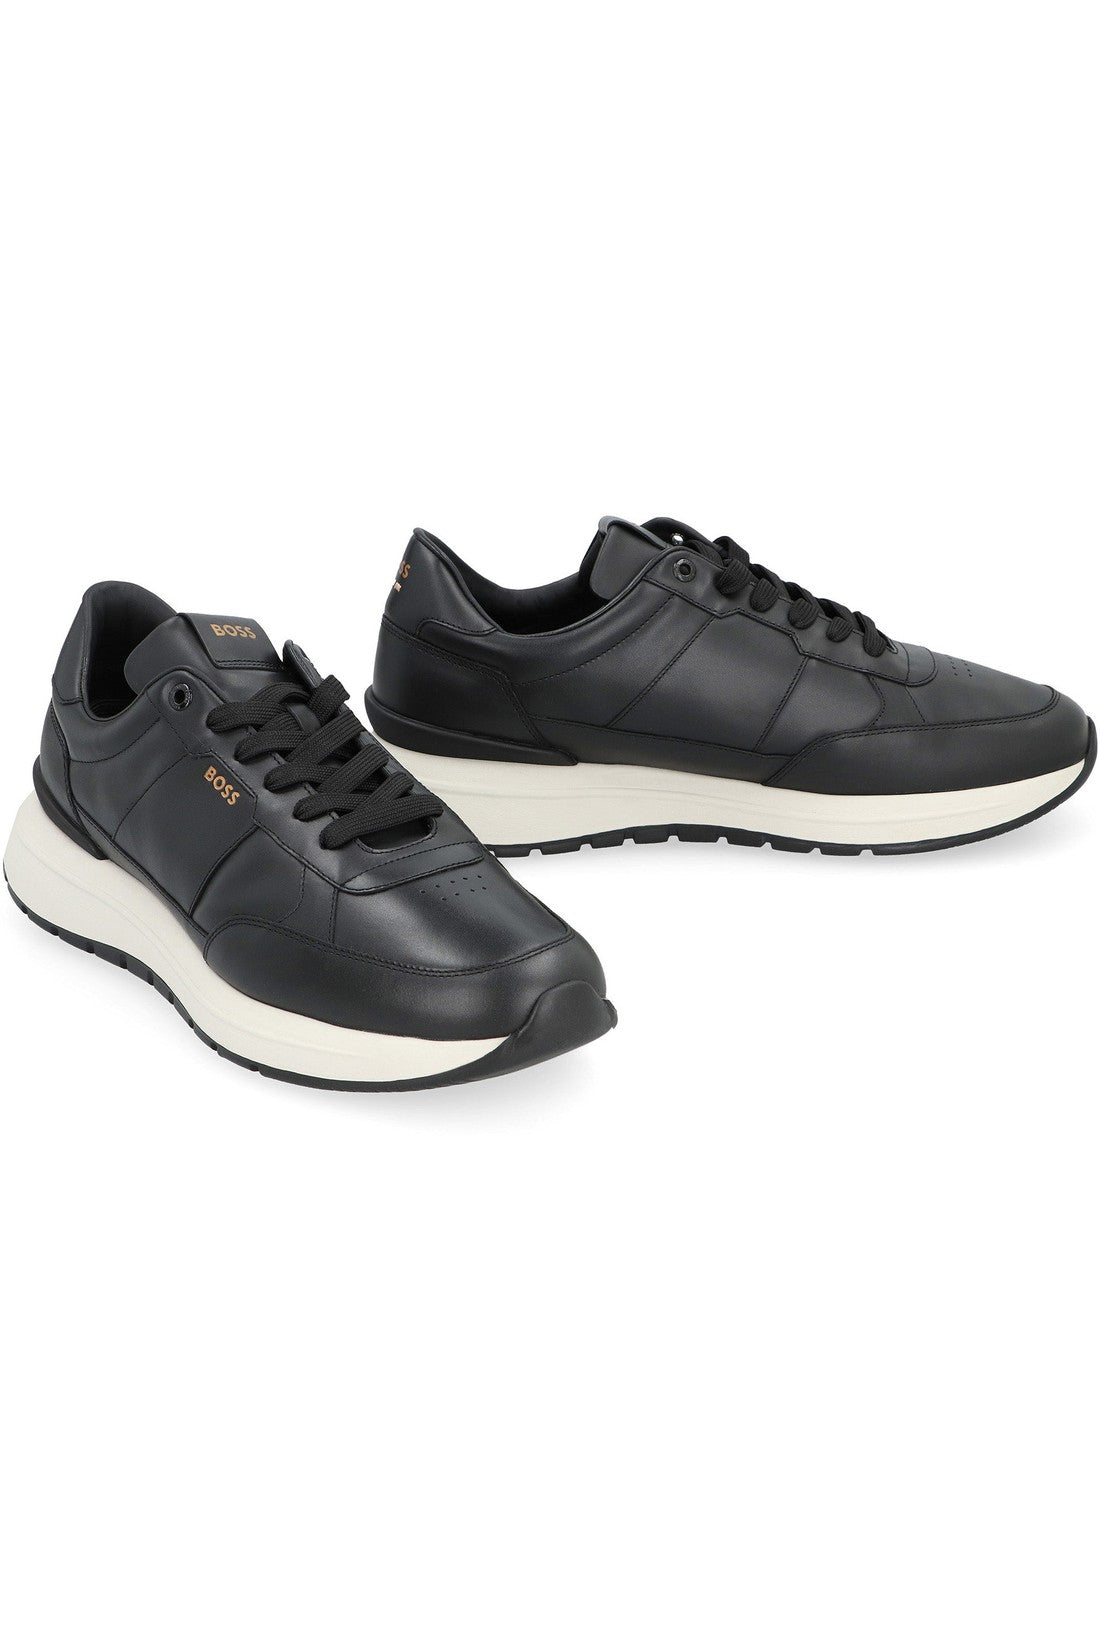 BOSS-OUTLET-SALE-Jace Leather low-top sneakers-ARCHIVIST